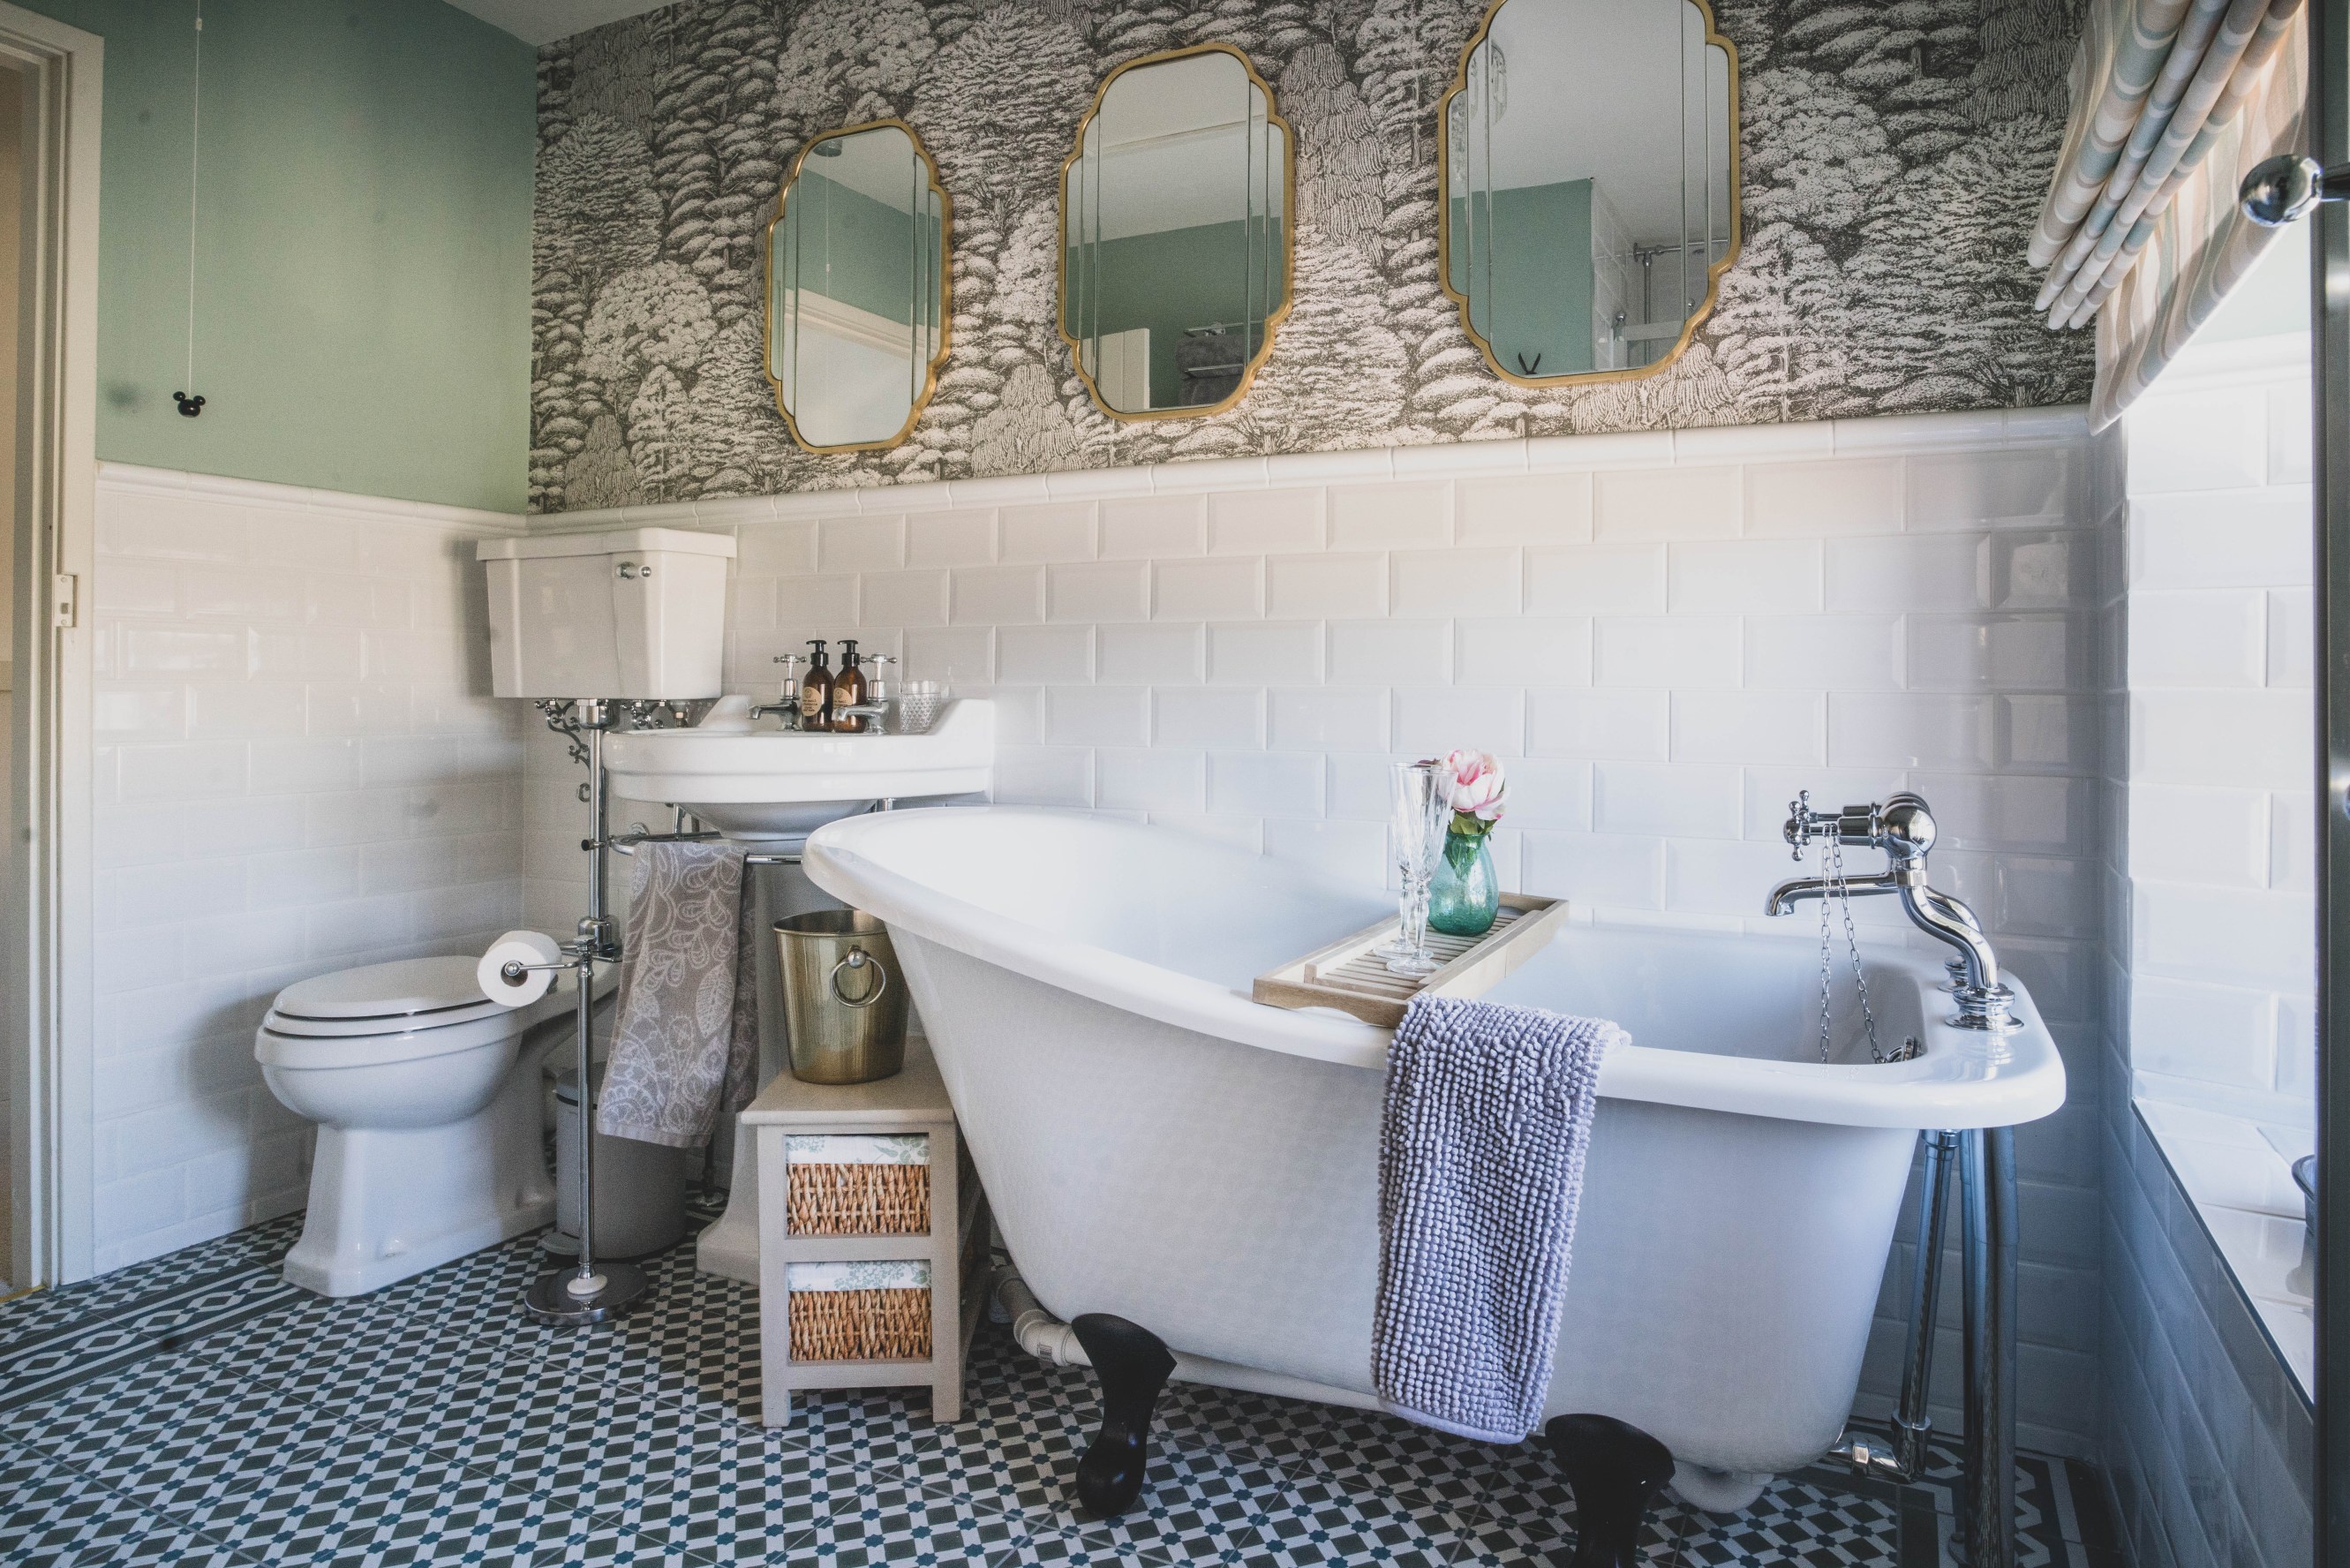 The bathroom has a large bathtub and cottage-like accents which make this a charming room